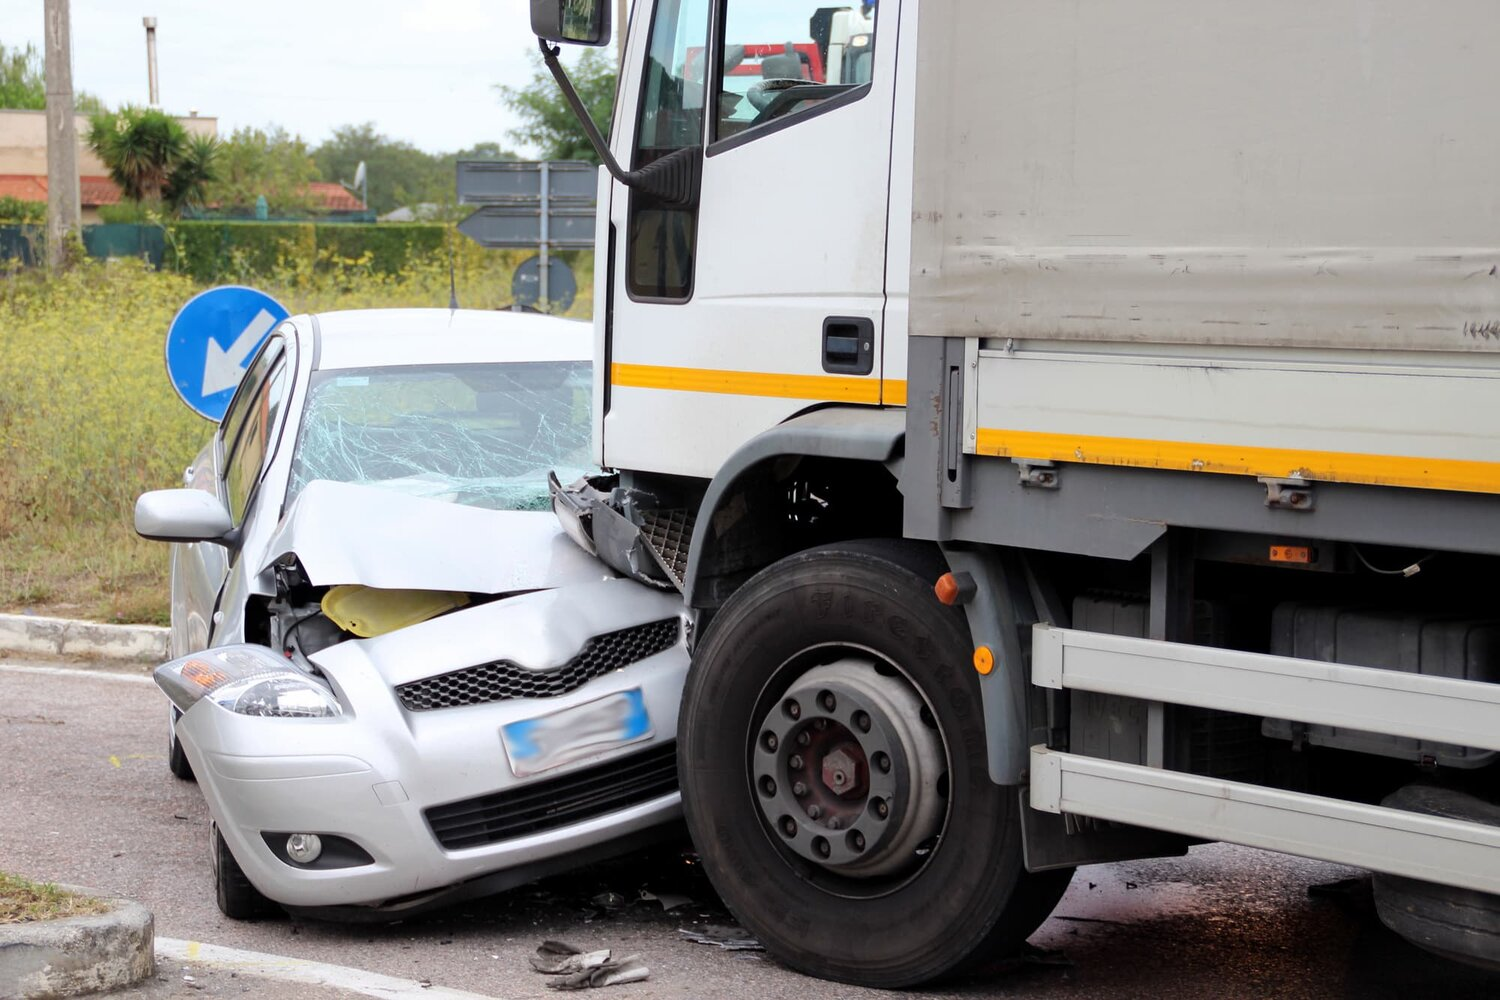 Who To Call After A Truck Accident?